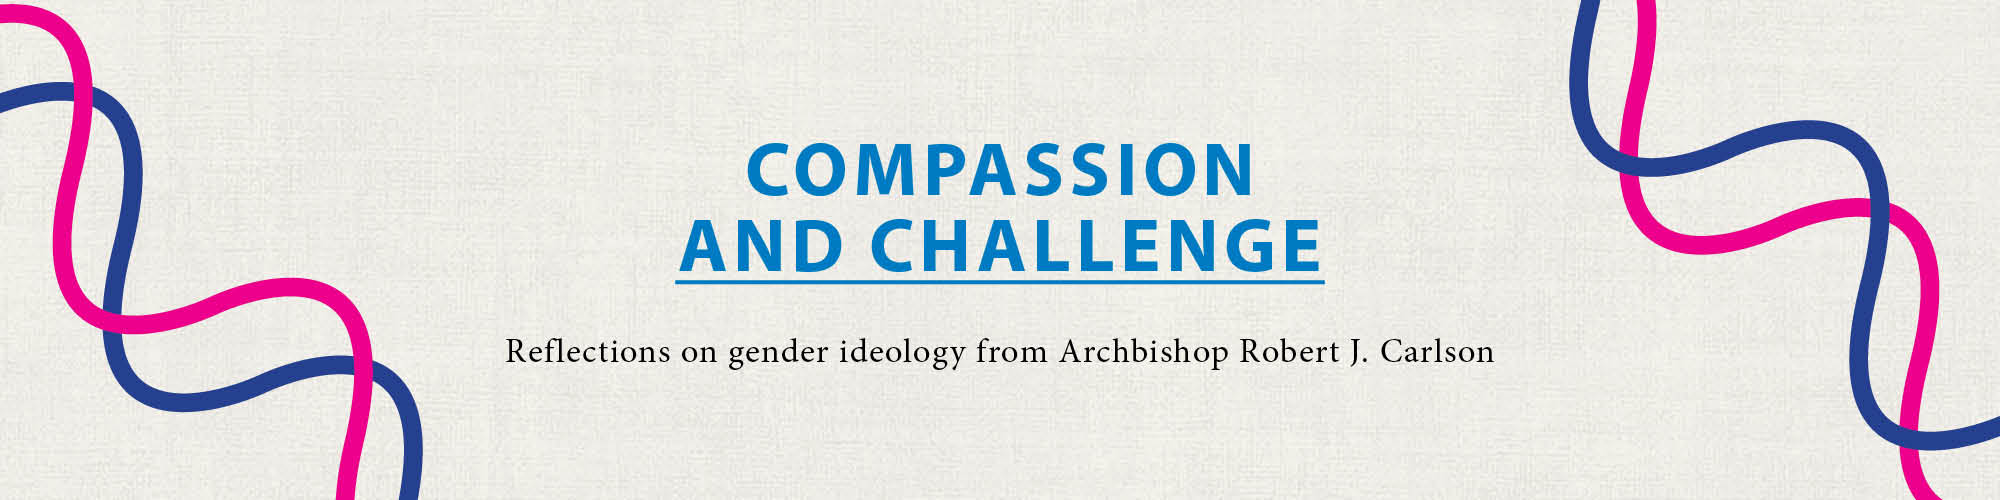 compassion-and-challenge-header